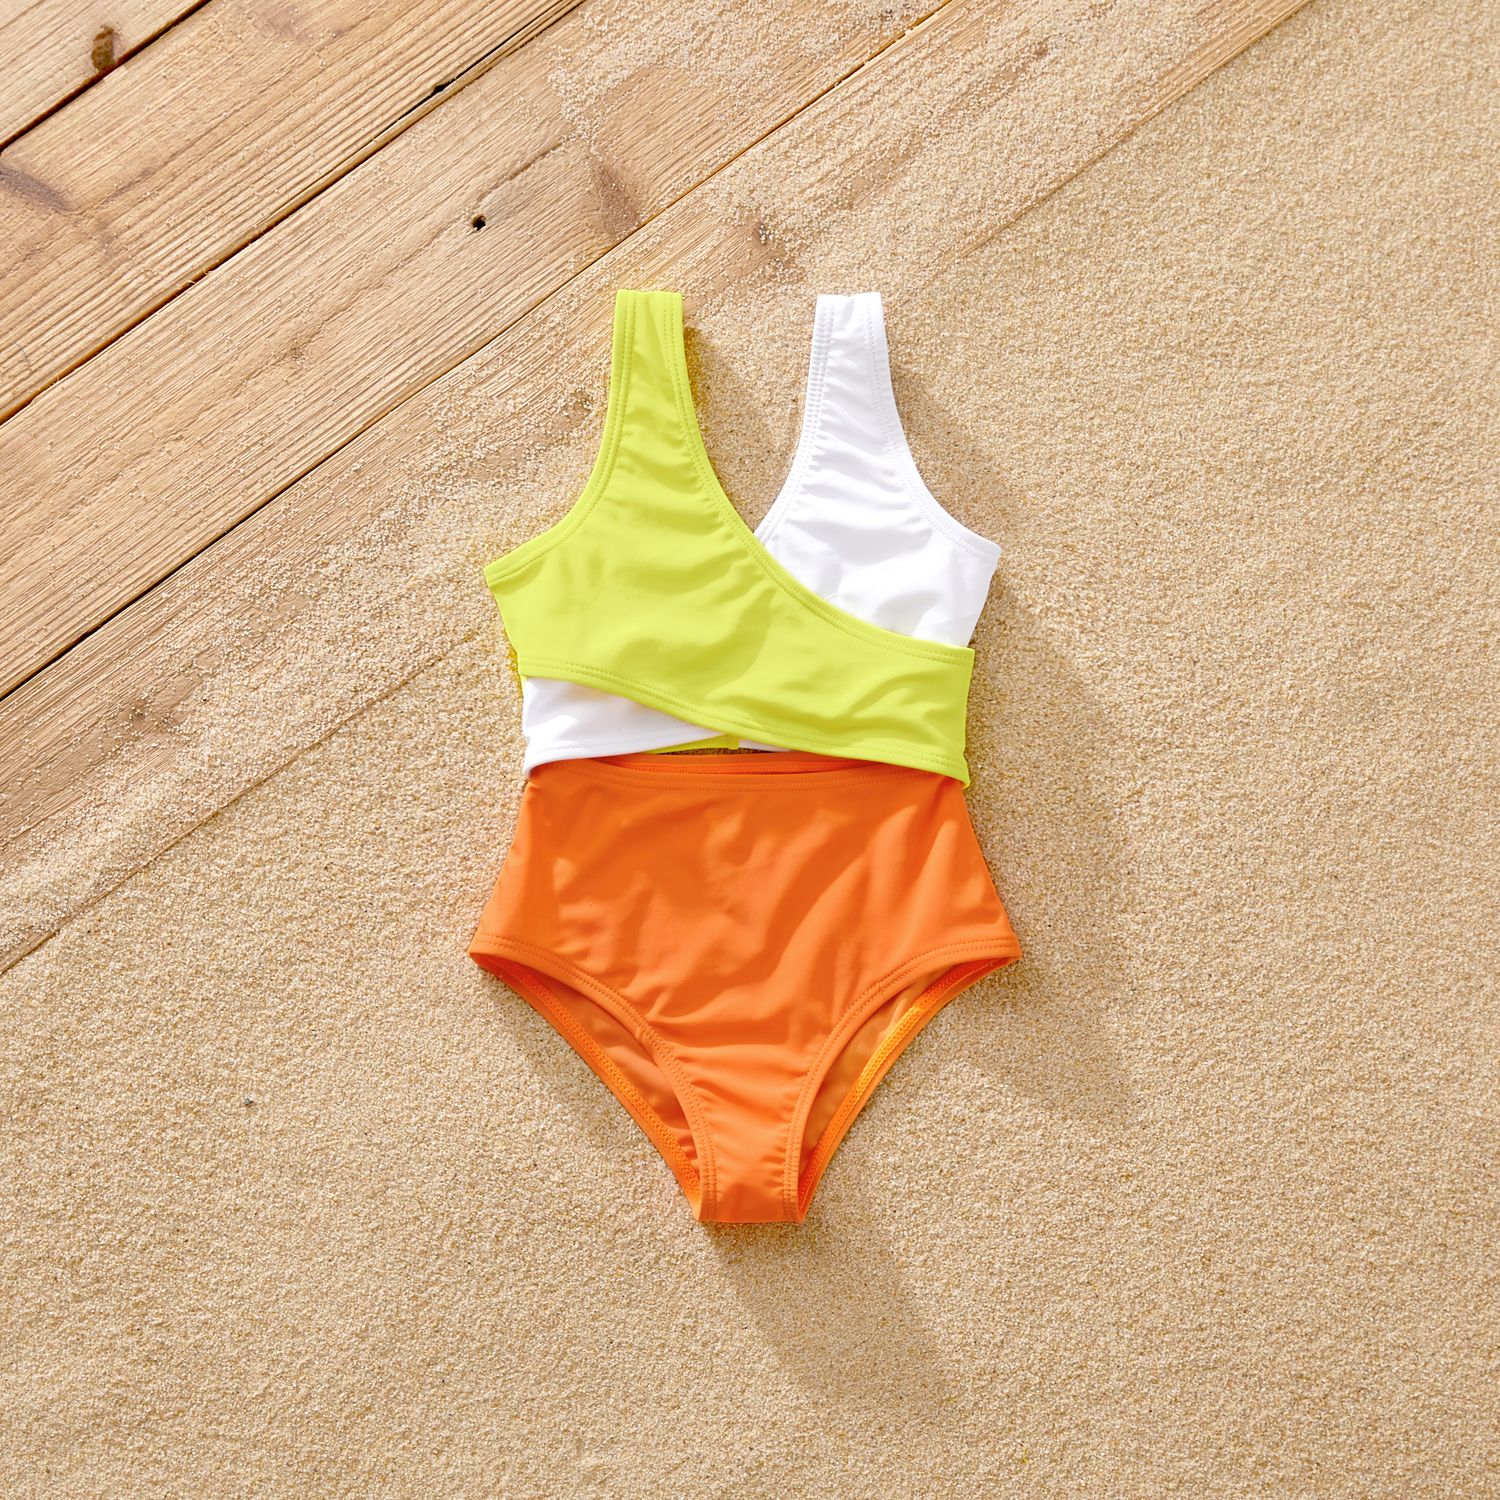 Family Matching Color Block Criss Cross Front One-piece Swimsuit Or Swim Trunks Shorts